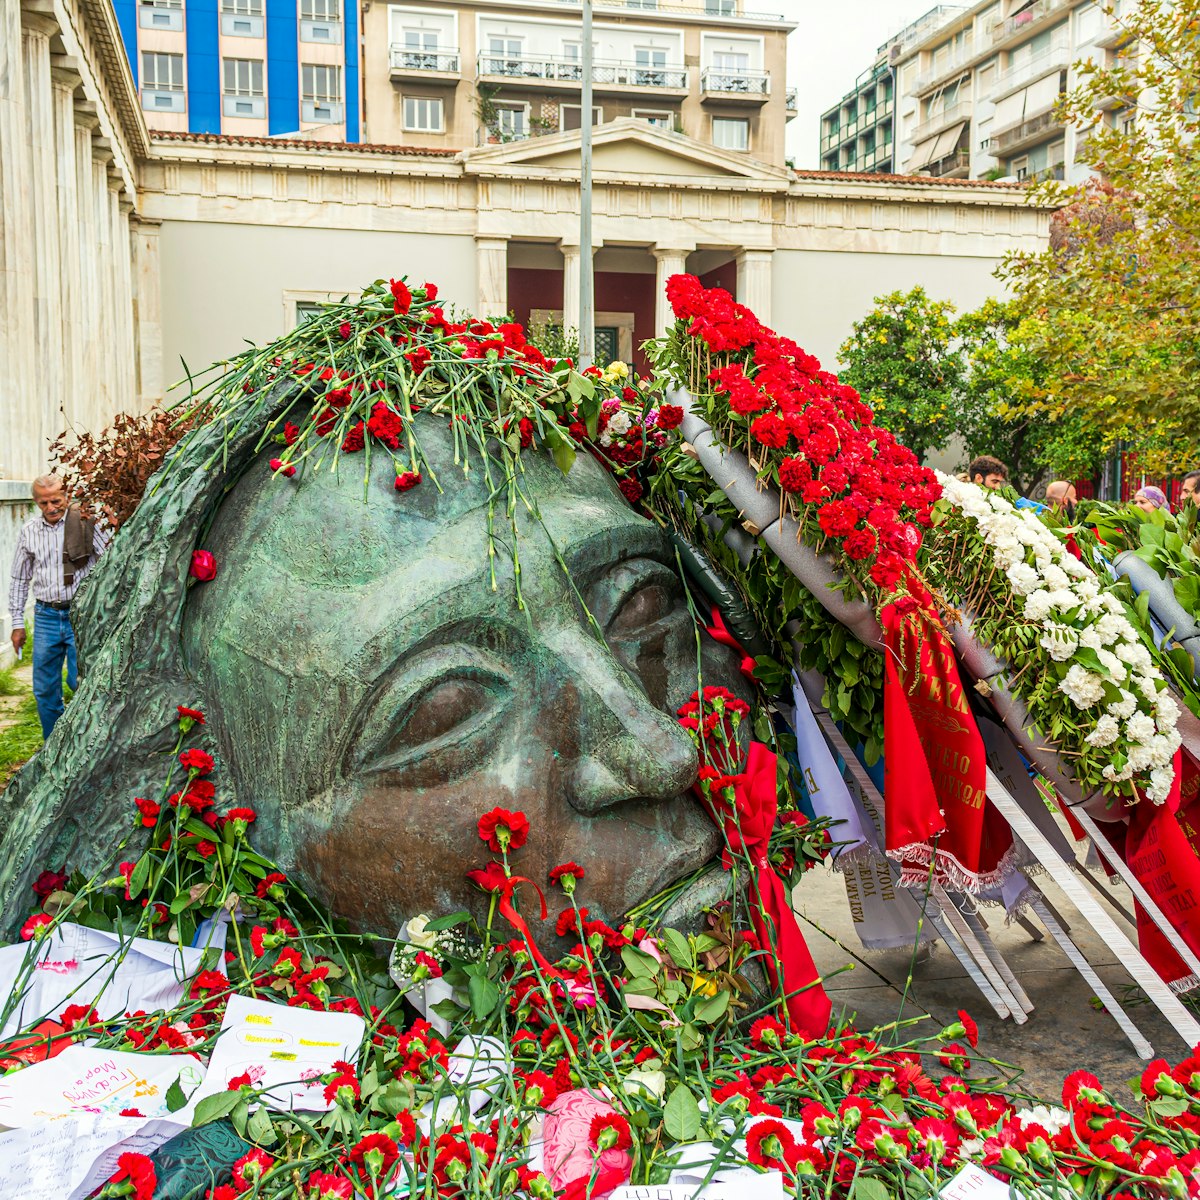 Athens, Greece - November 17, 2019: The Athens Polytechnic Monument covered with flowers to commemorate the anniversary of the uprising students against the Greek junta in 1973.; Shutterstock ID 1604008183; your: Erin Lenczycki; gl: 65050; netsuite: Digital; full: POI
1604008183